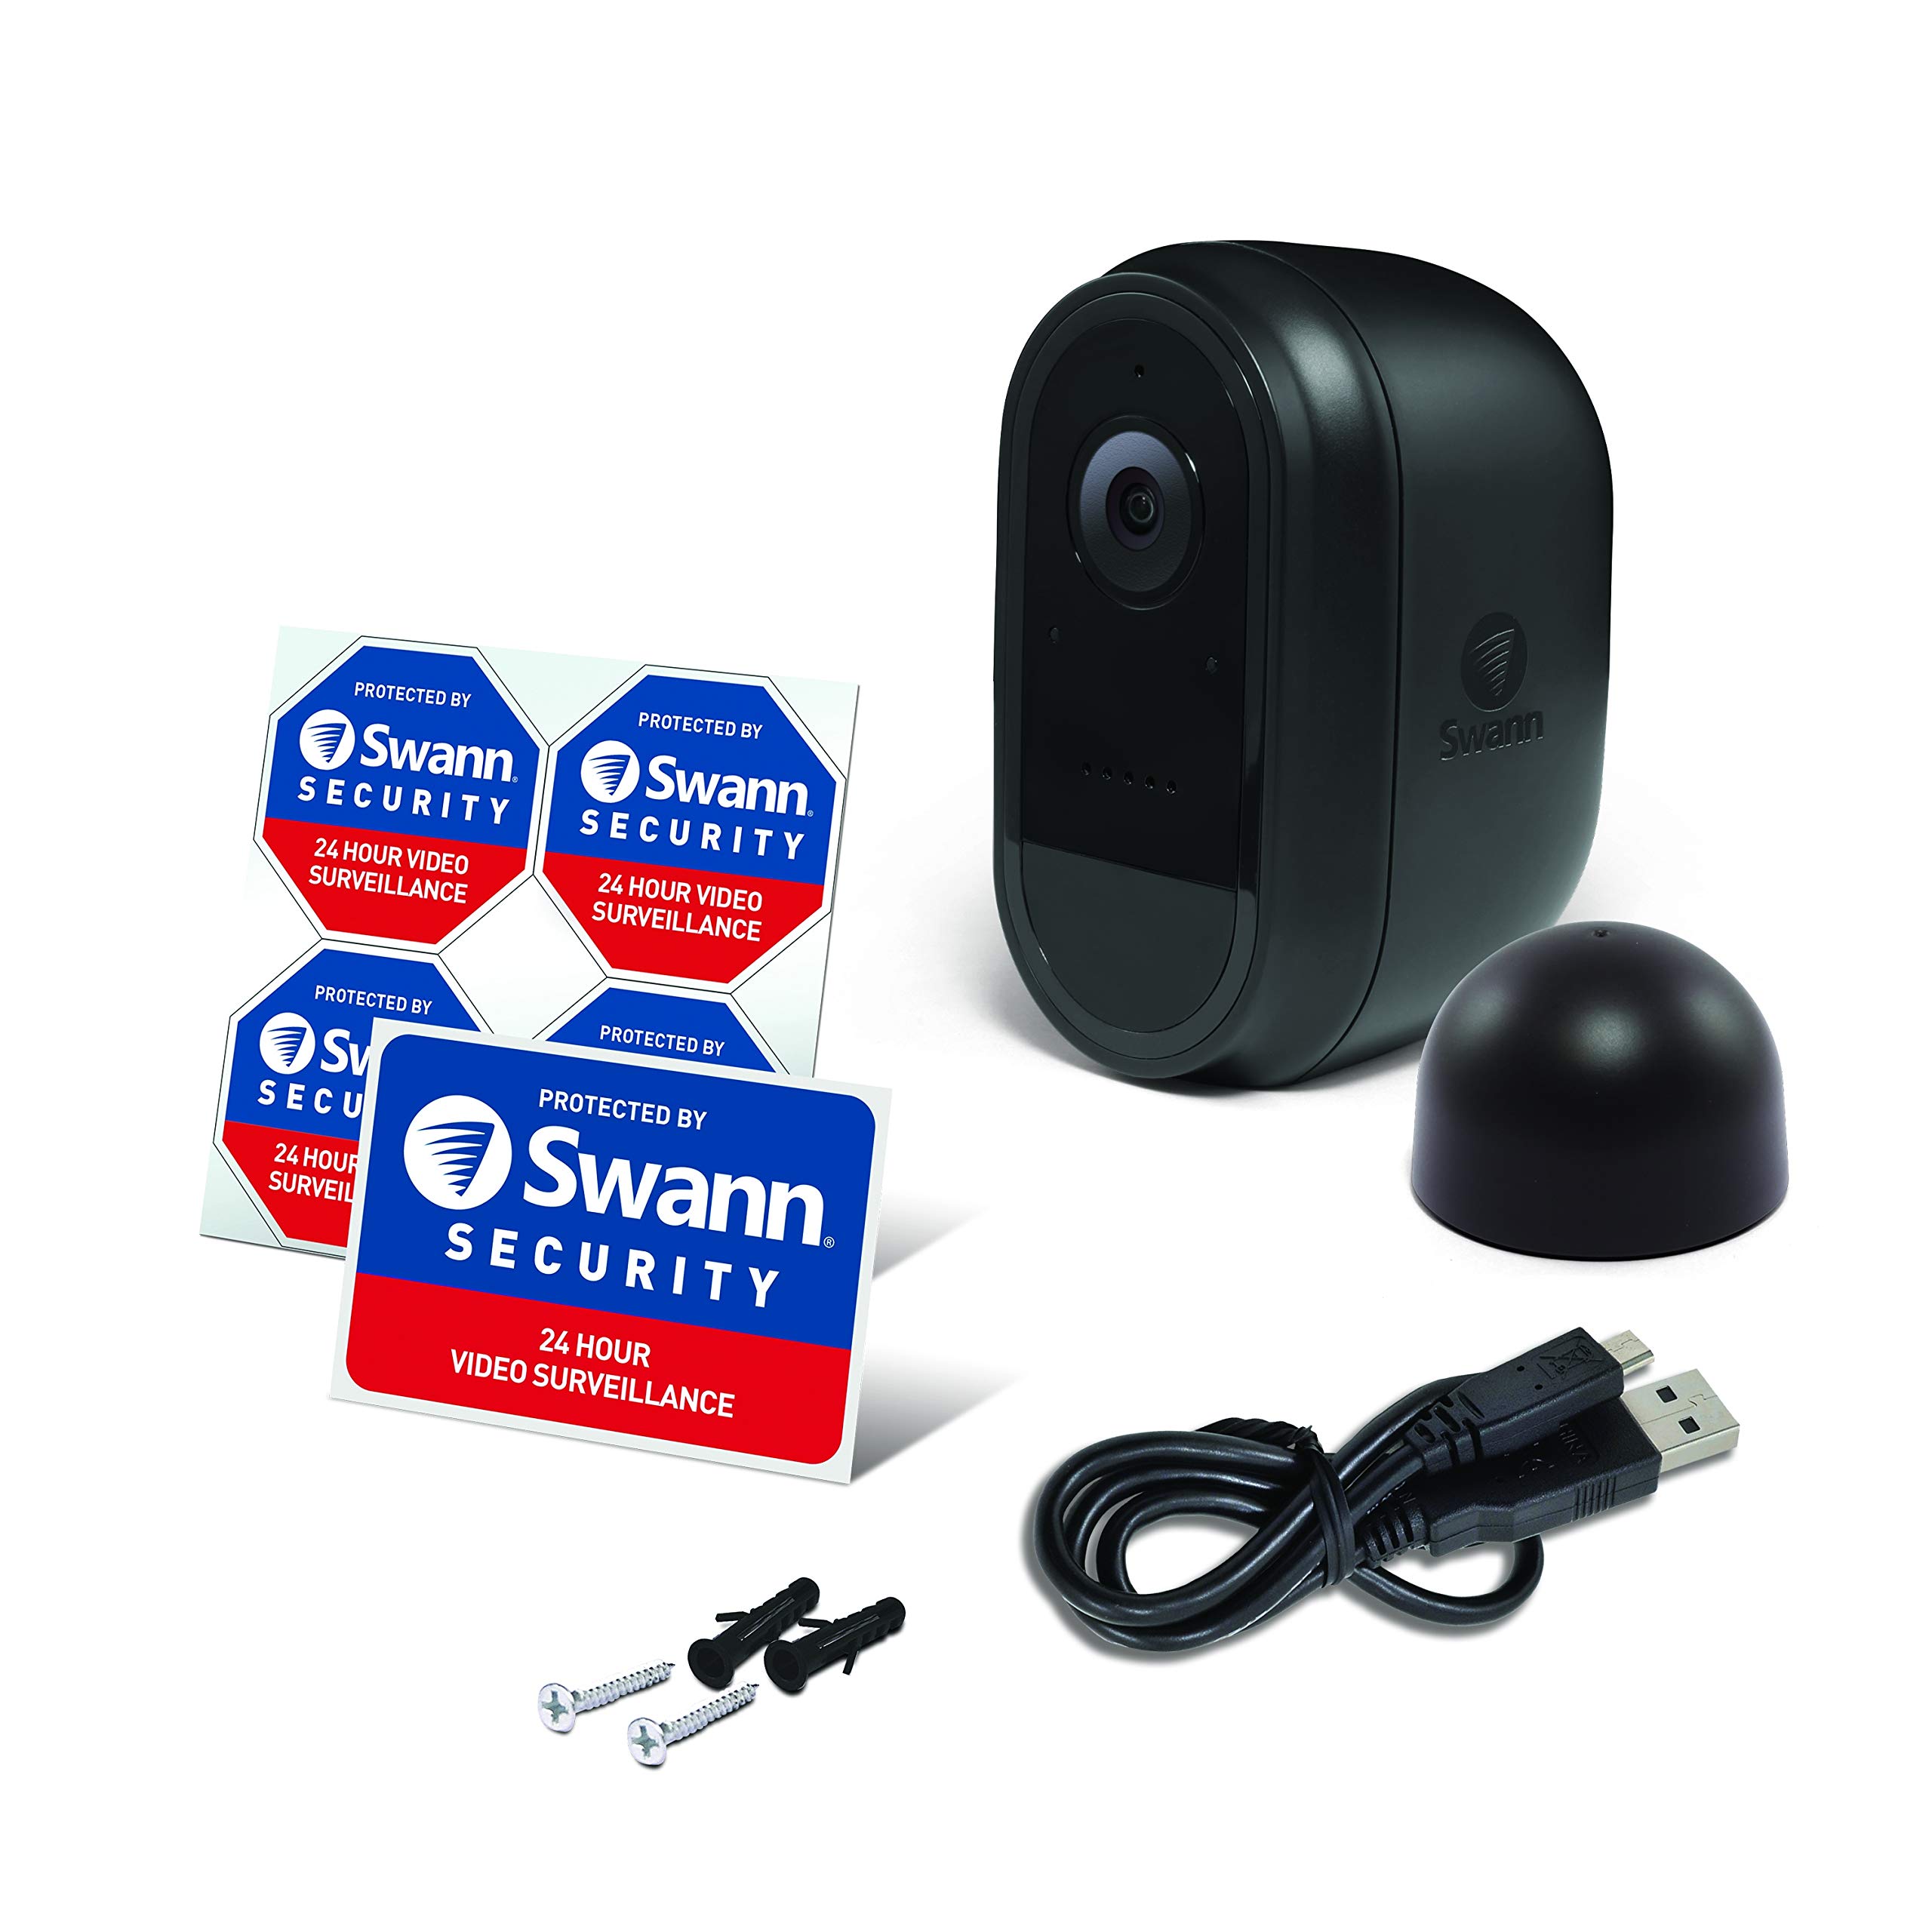 Swann Wire-Free 1080p Full HD Indoor & Outdoor Waterproof Recharcheable Security Camera with Night Vision, 2-Way Talk, Heat, Motion & Person Detection, Free Cloud & Local Recording.